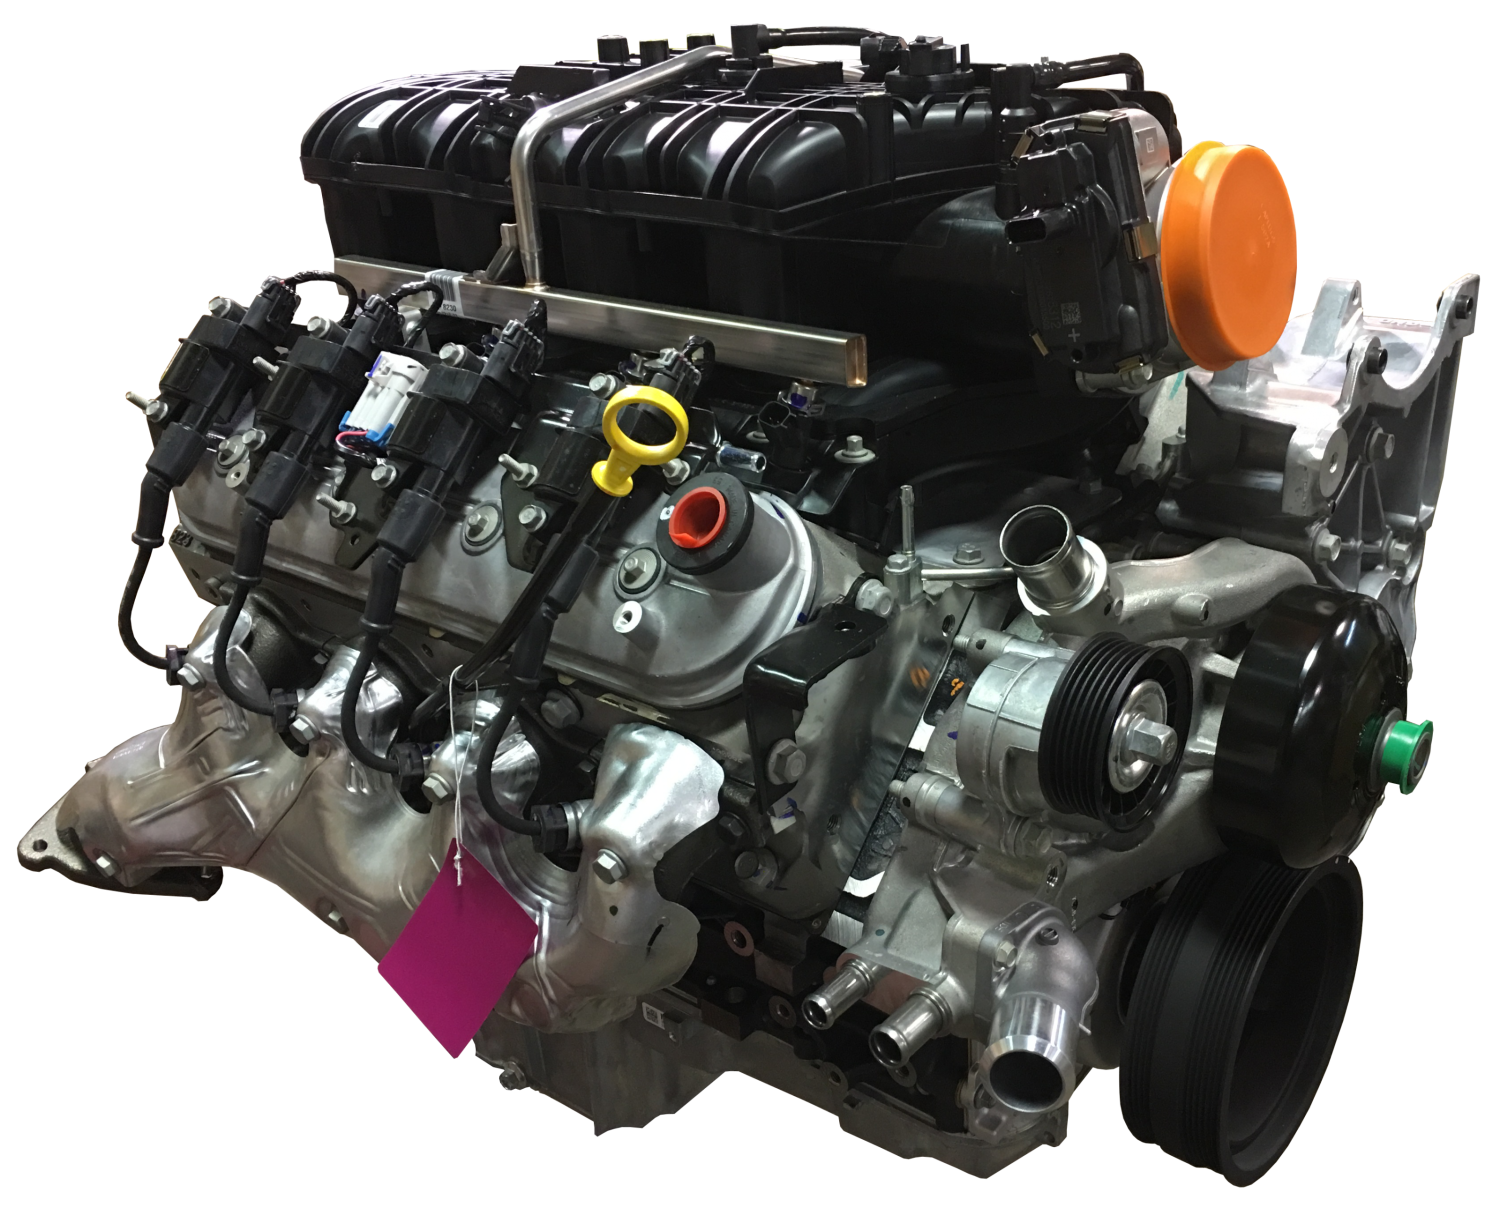 19416591 - L96 6.0L 360HP Gen IV CPP Crate Engine Chevrolet Performance ...